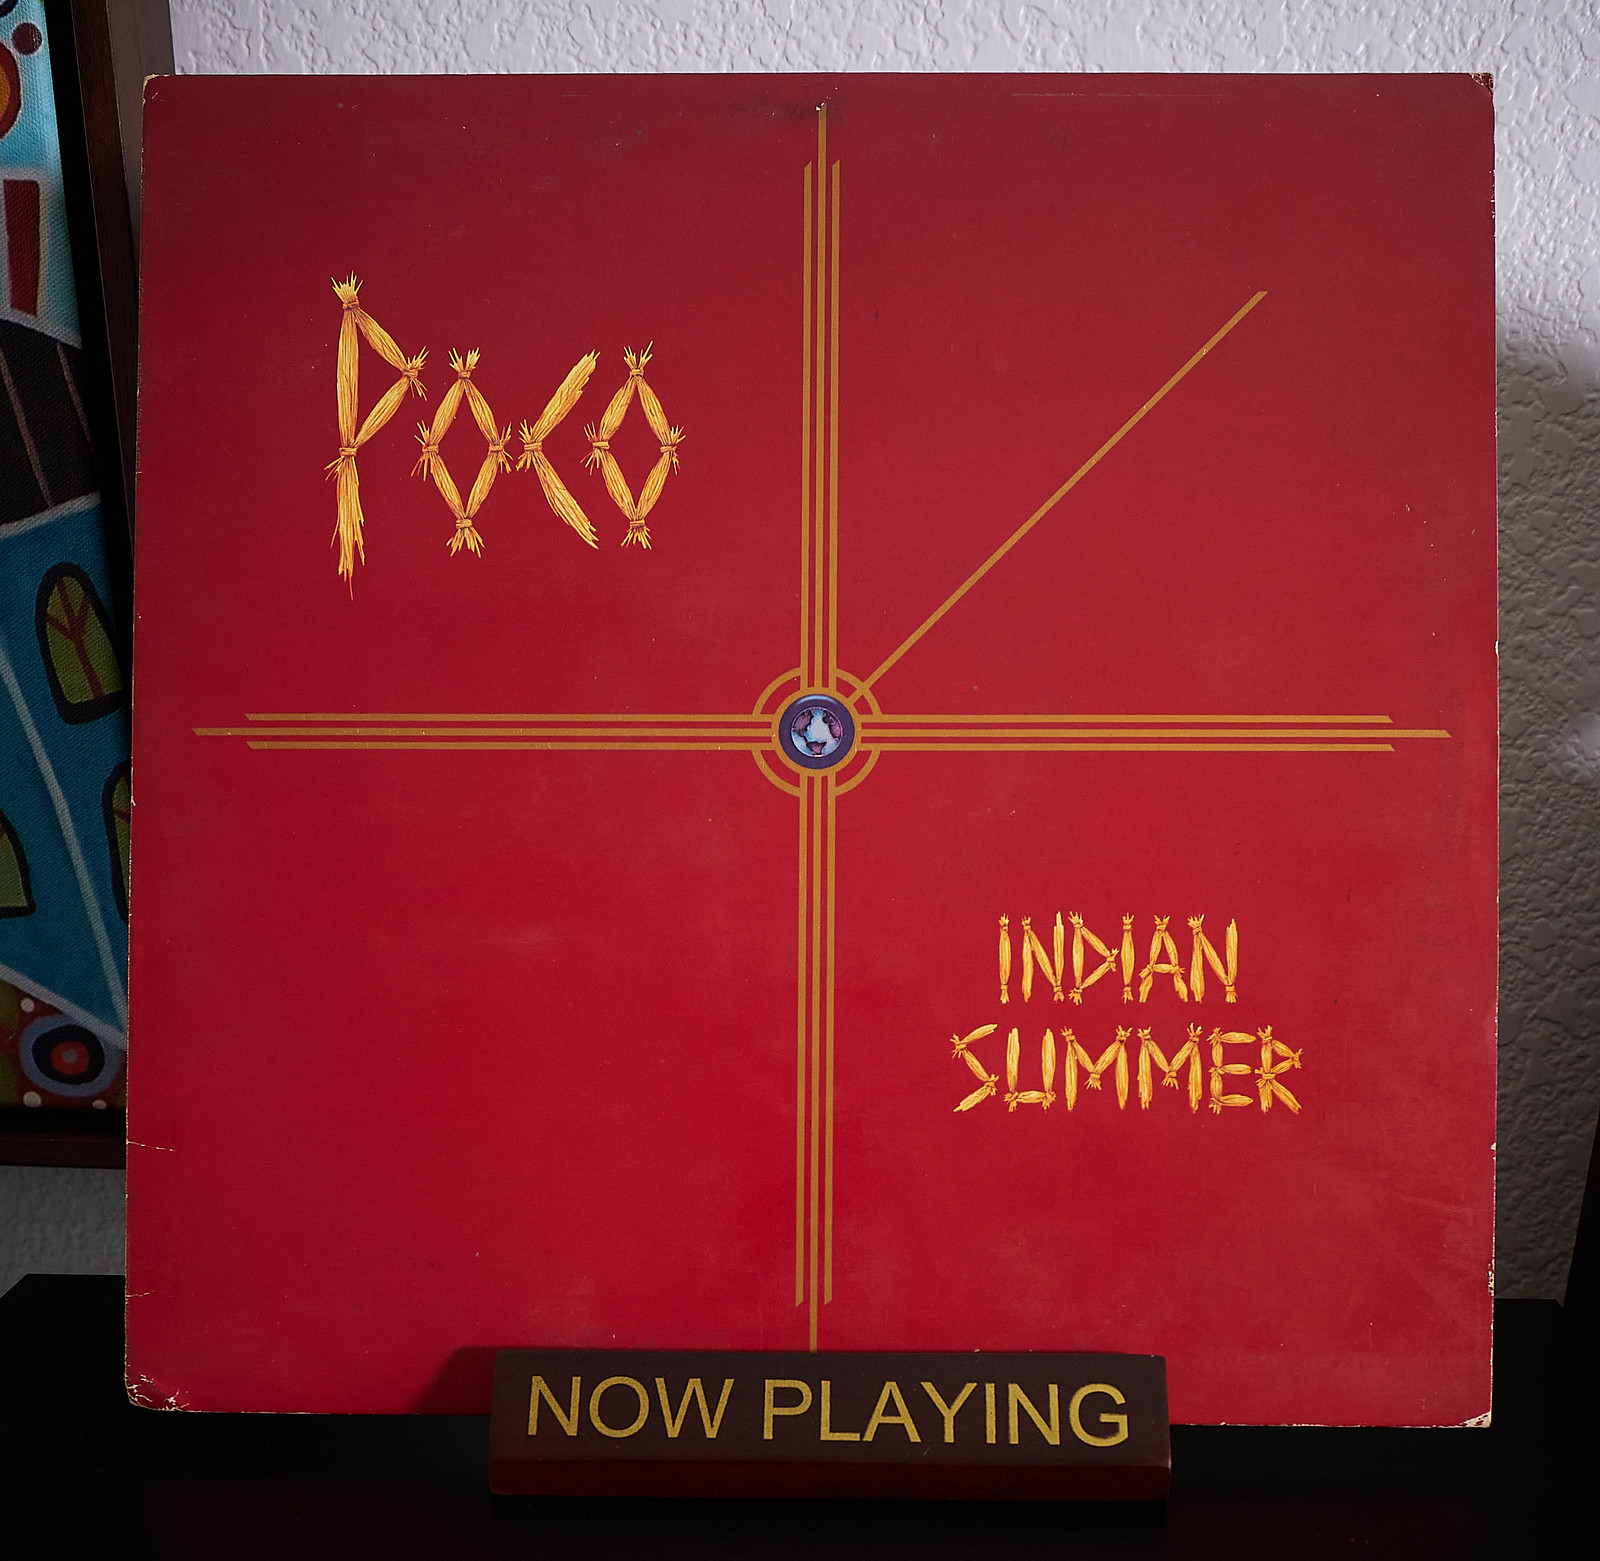 Now Playing: Poco - Indian Summer.